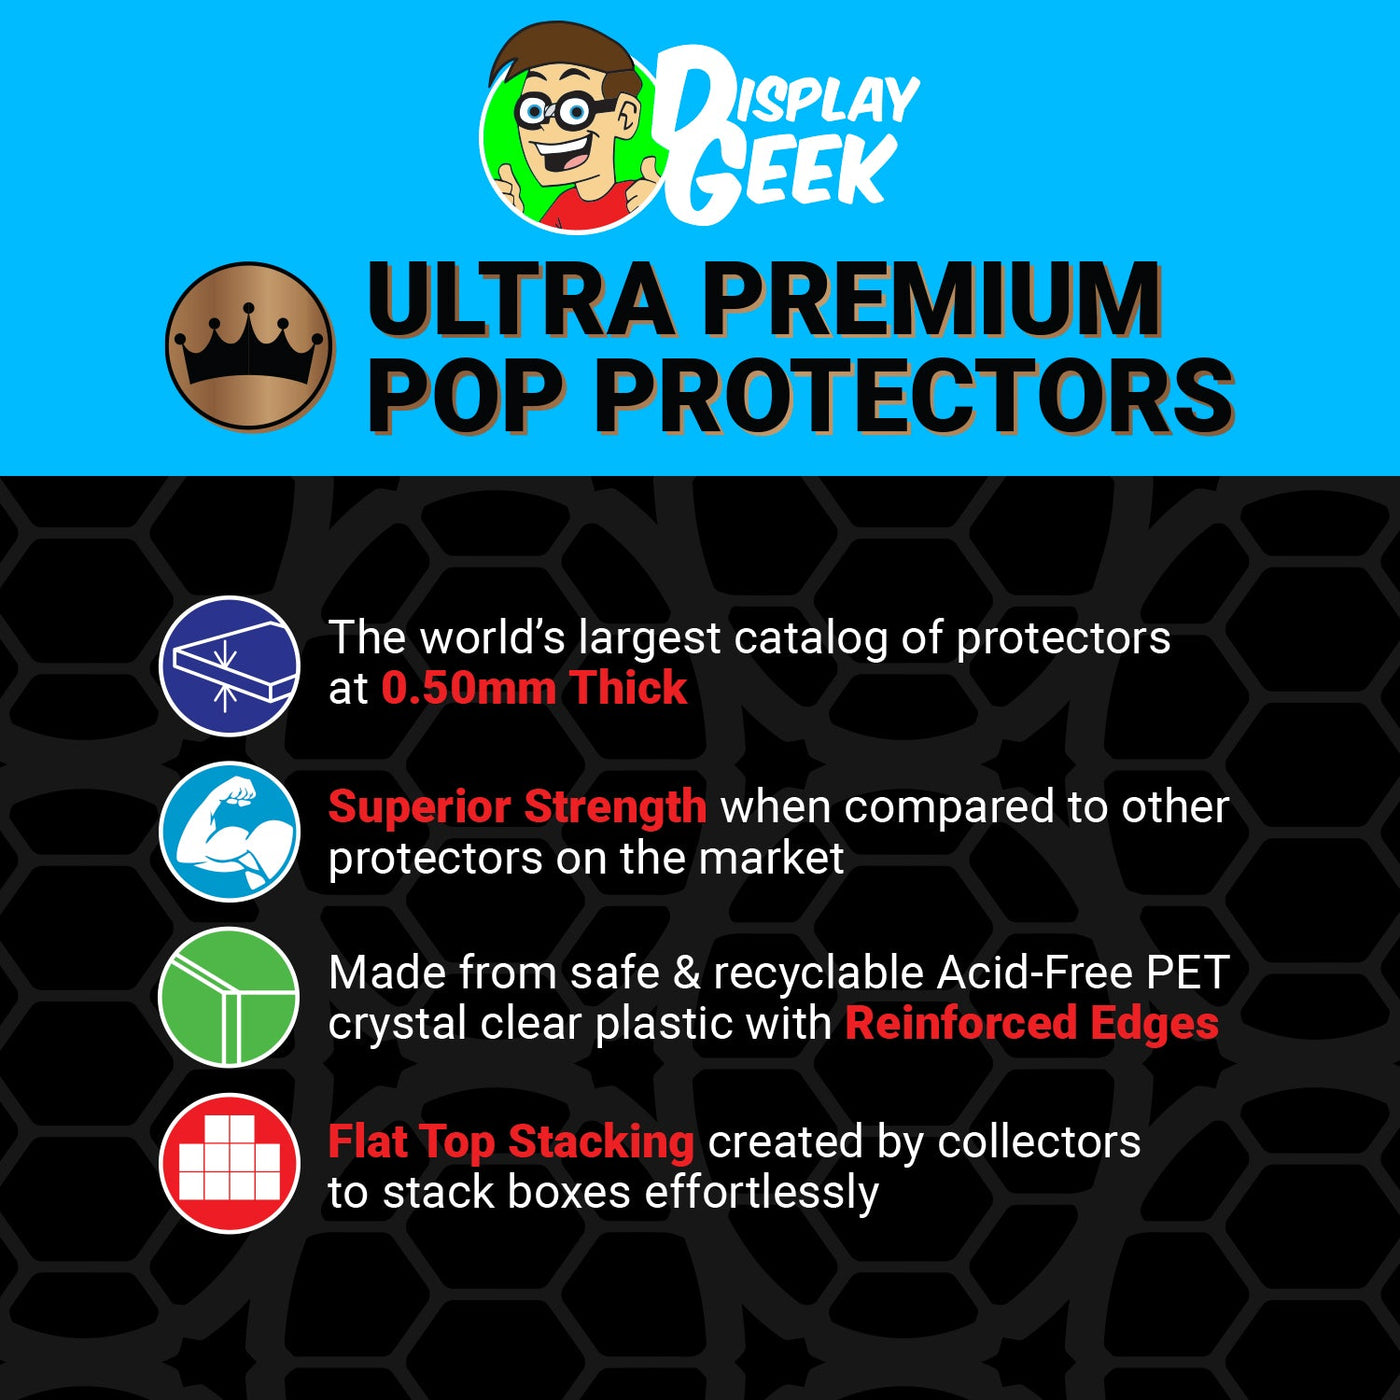 Pop Protector for 10 inch Count Chocula #60 Jumbo Funko Pop on The Protector Guide App by Display Geek